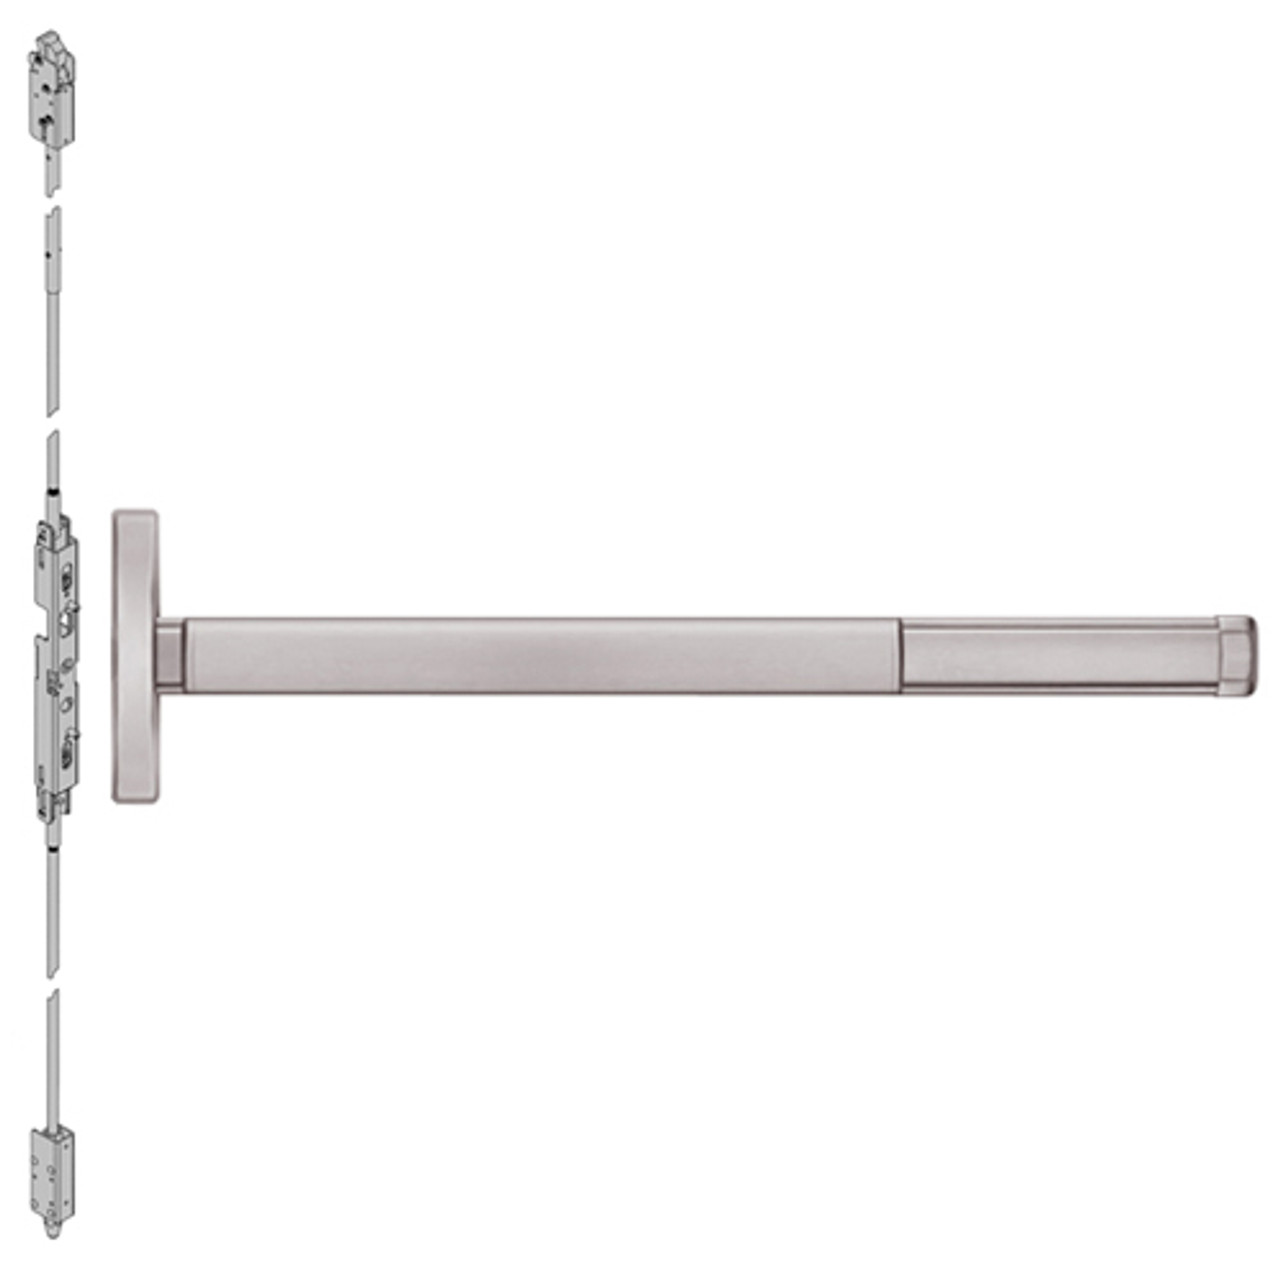 DE2601LBR-628-36 PHI 2600 Series Concealed Vertical Rod Exit Device with Delayed Egress Prepped for Cover Plate in Satin Aluminum Finish